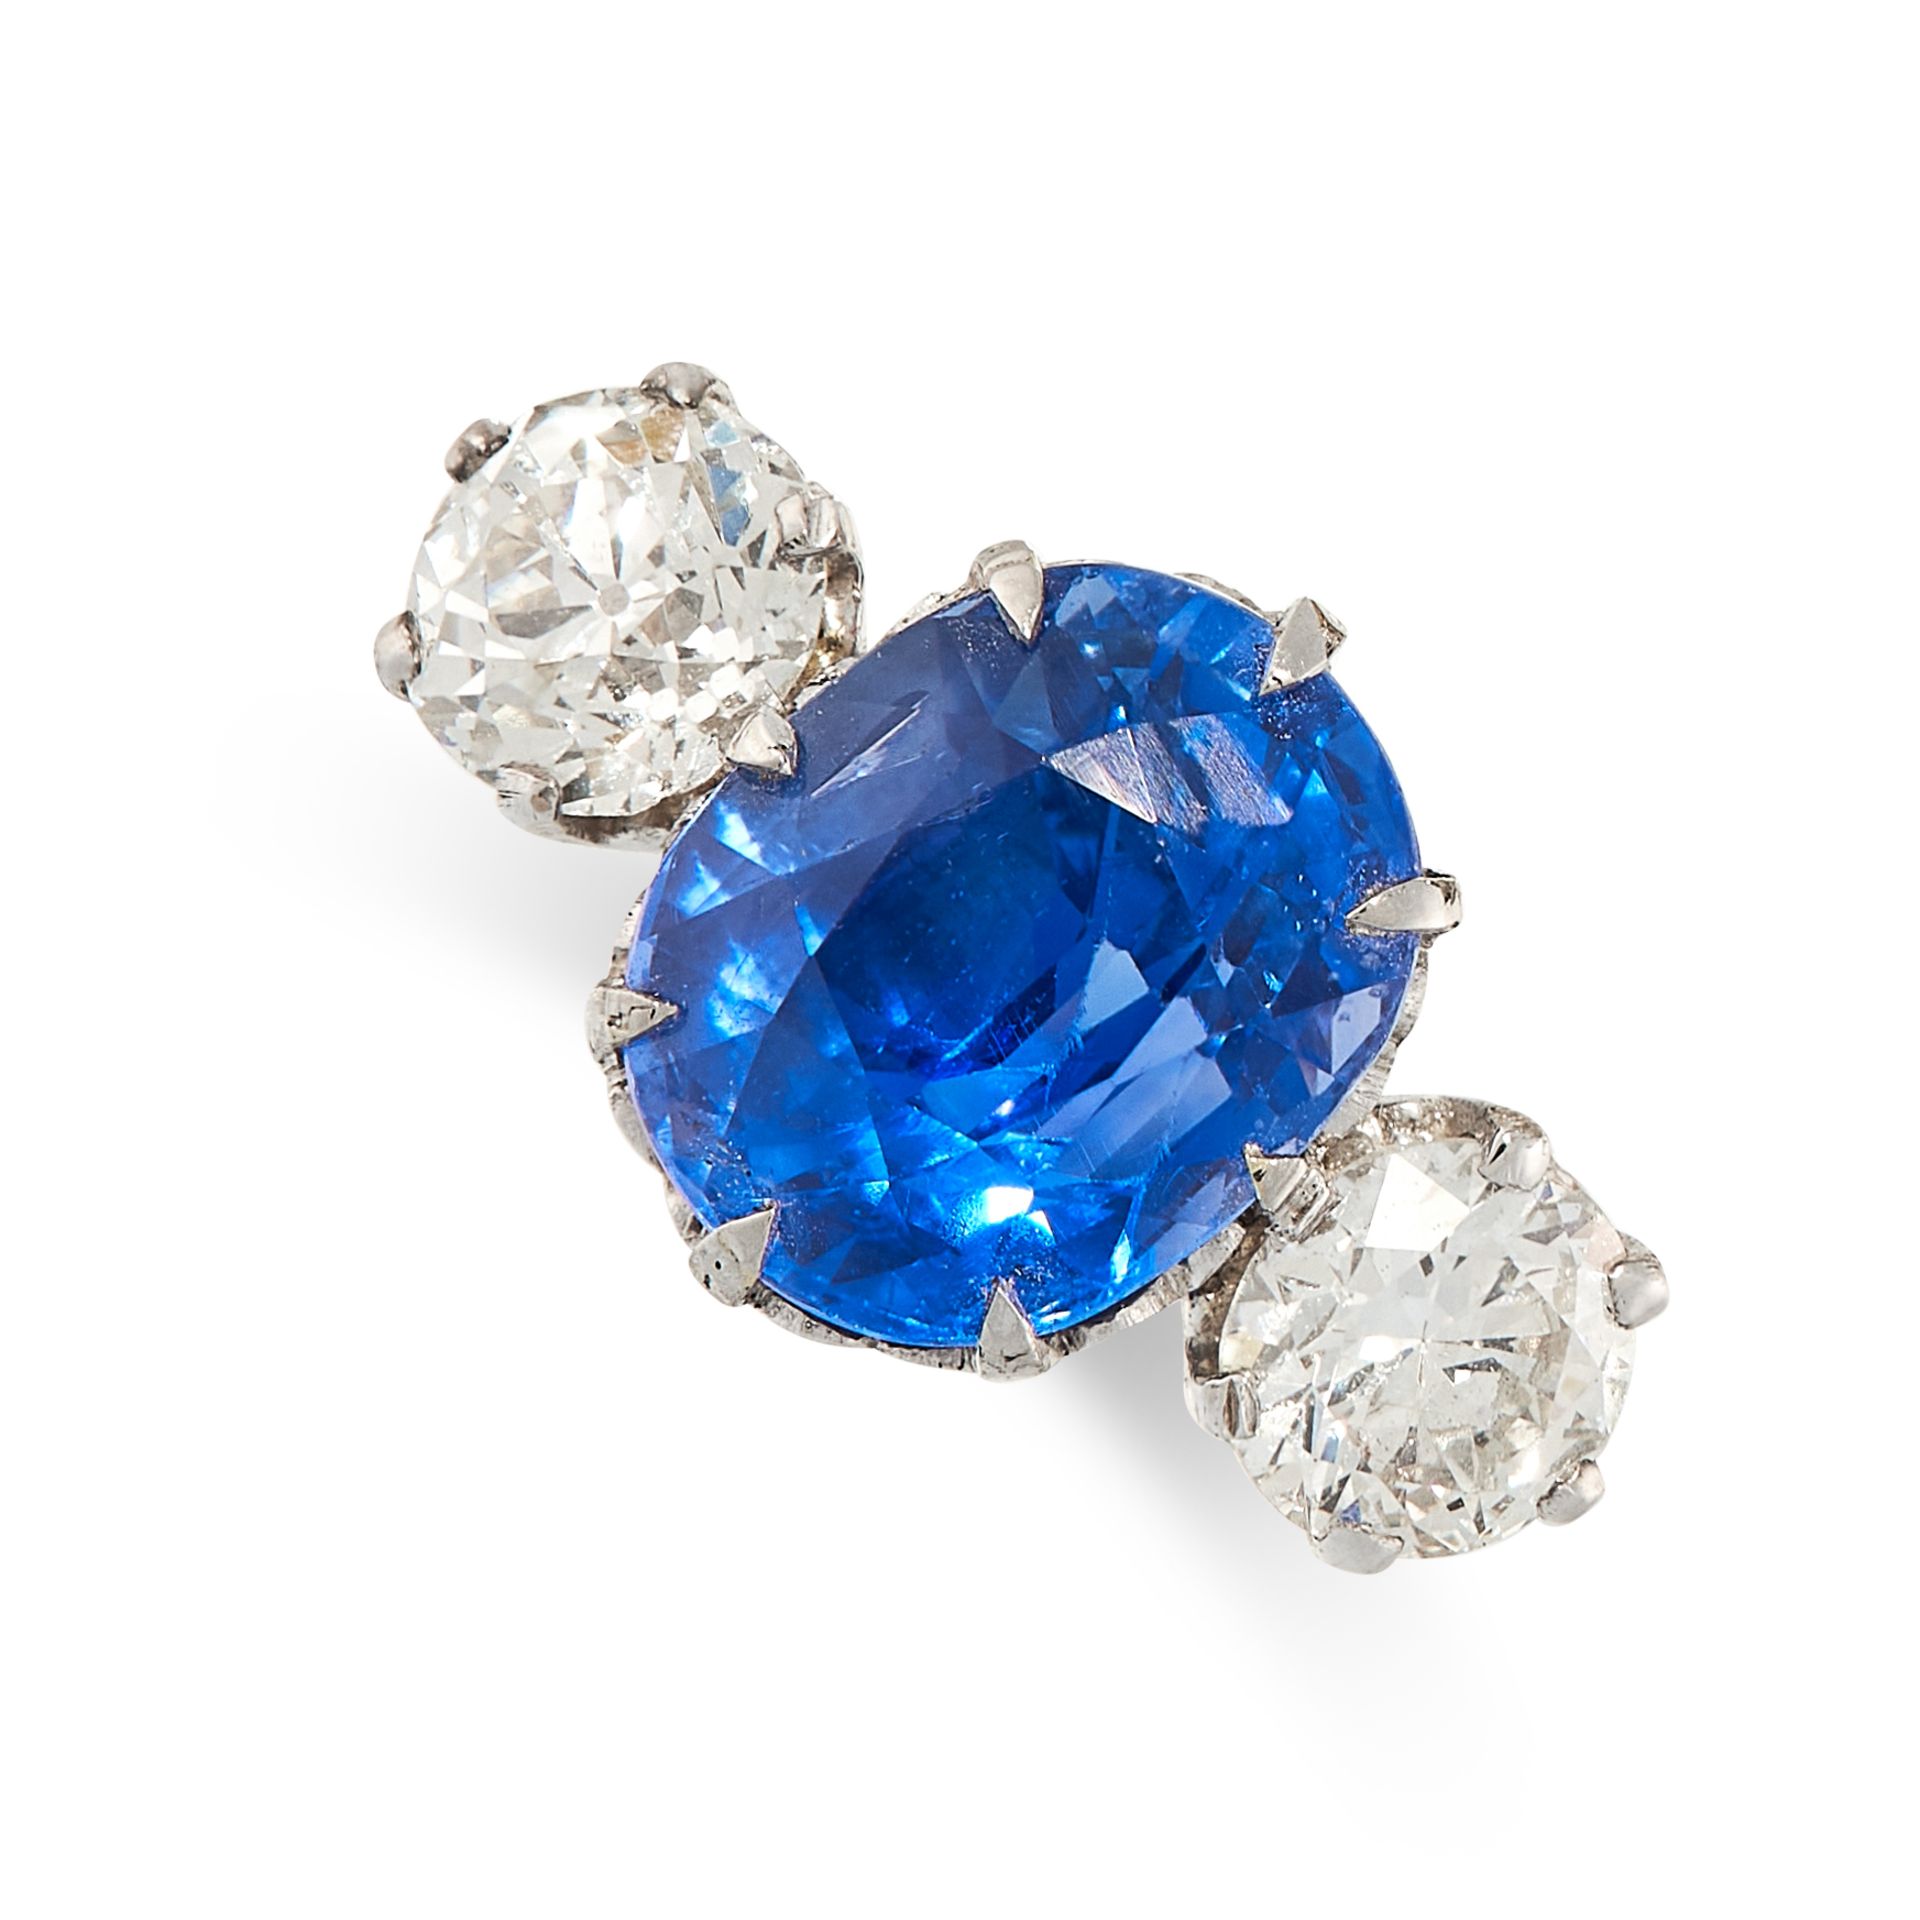 A CEYLON NO HEAT SAPPHIRE AND DIAMOND RING in 18ct white gold, set with a cushion cut blue